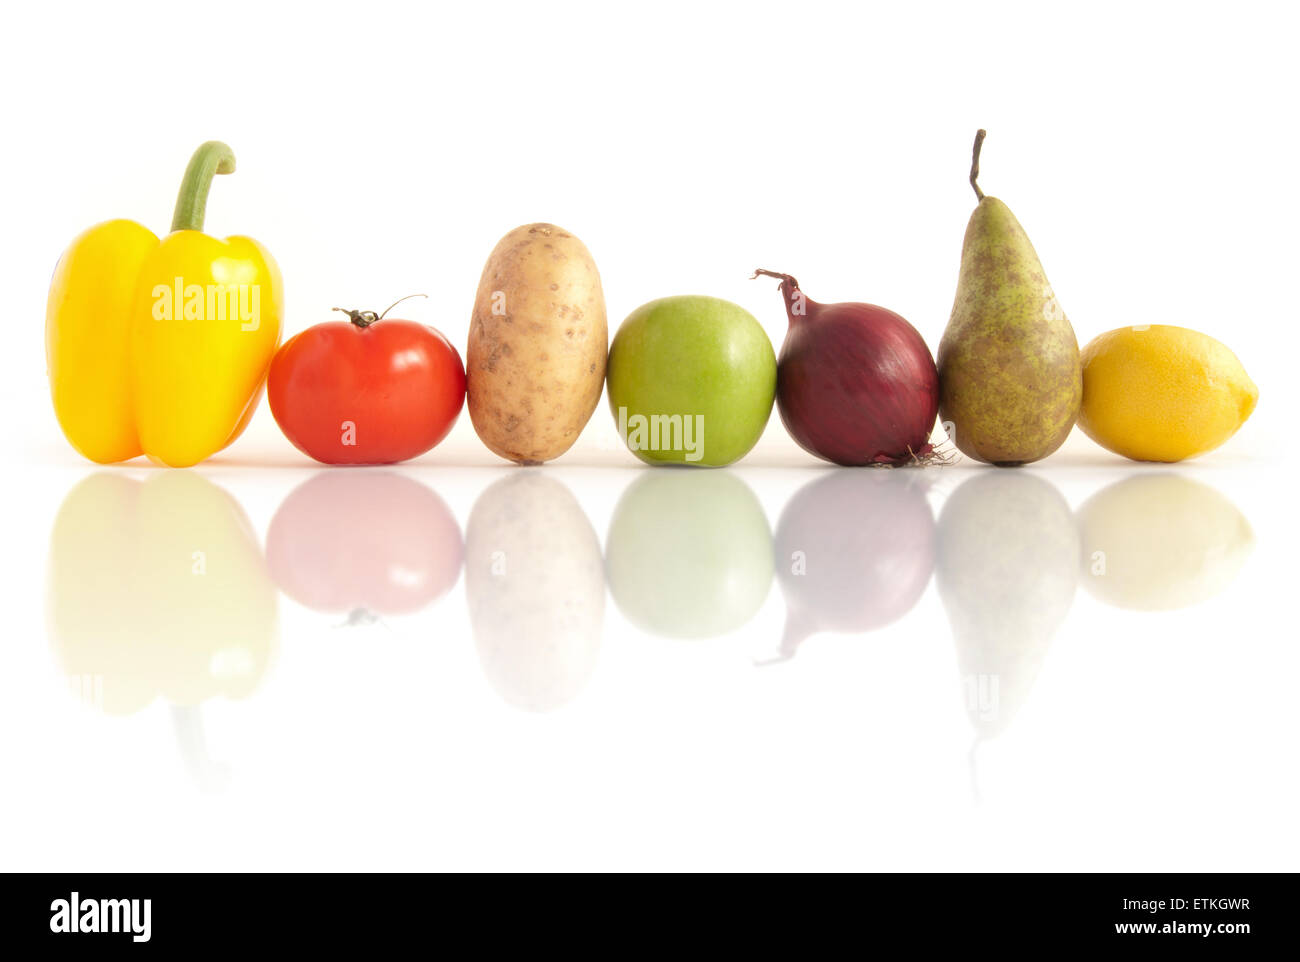 Organic fruits and vegetables in a row over a white background Stock Photo